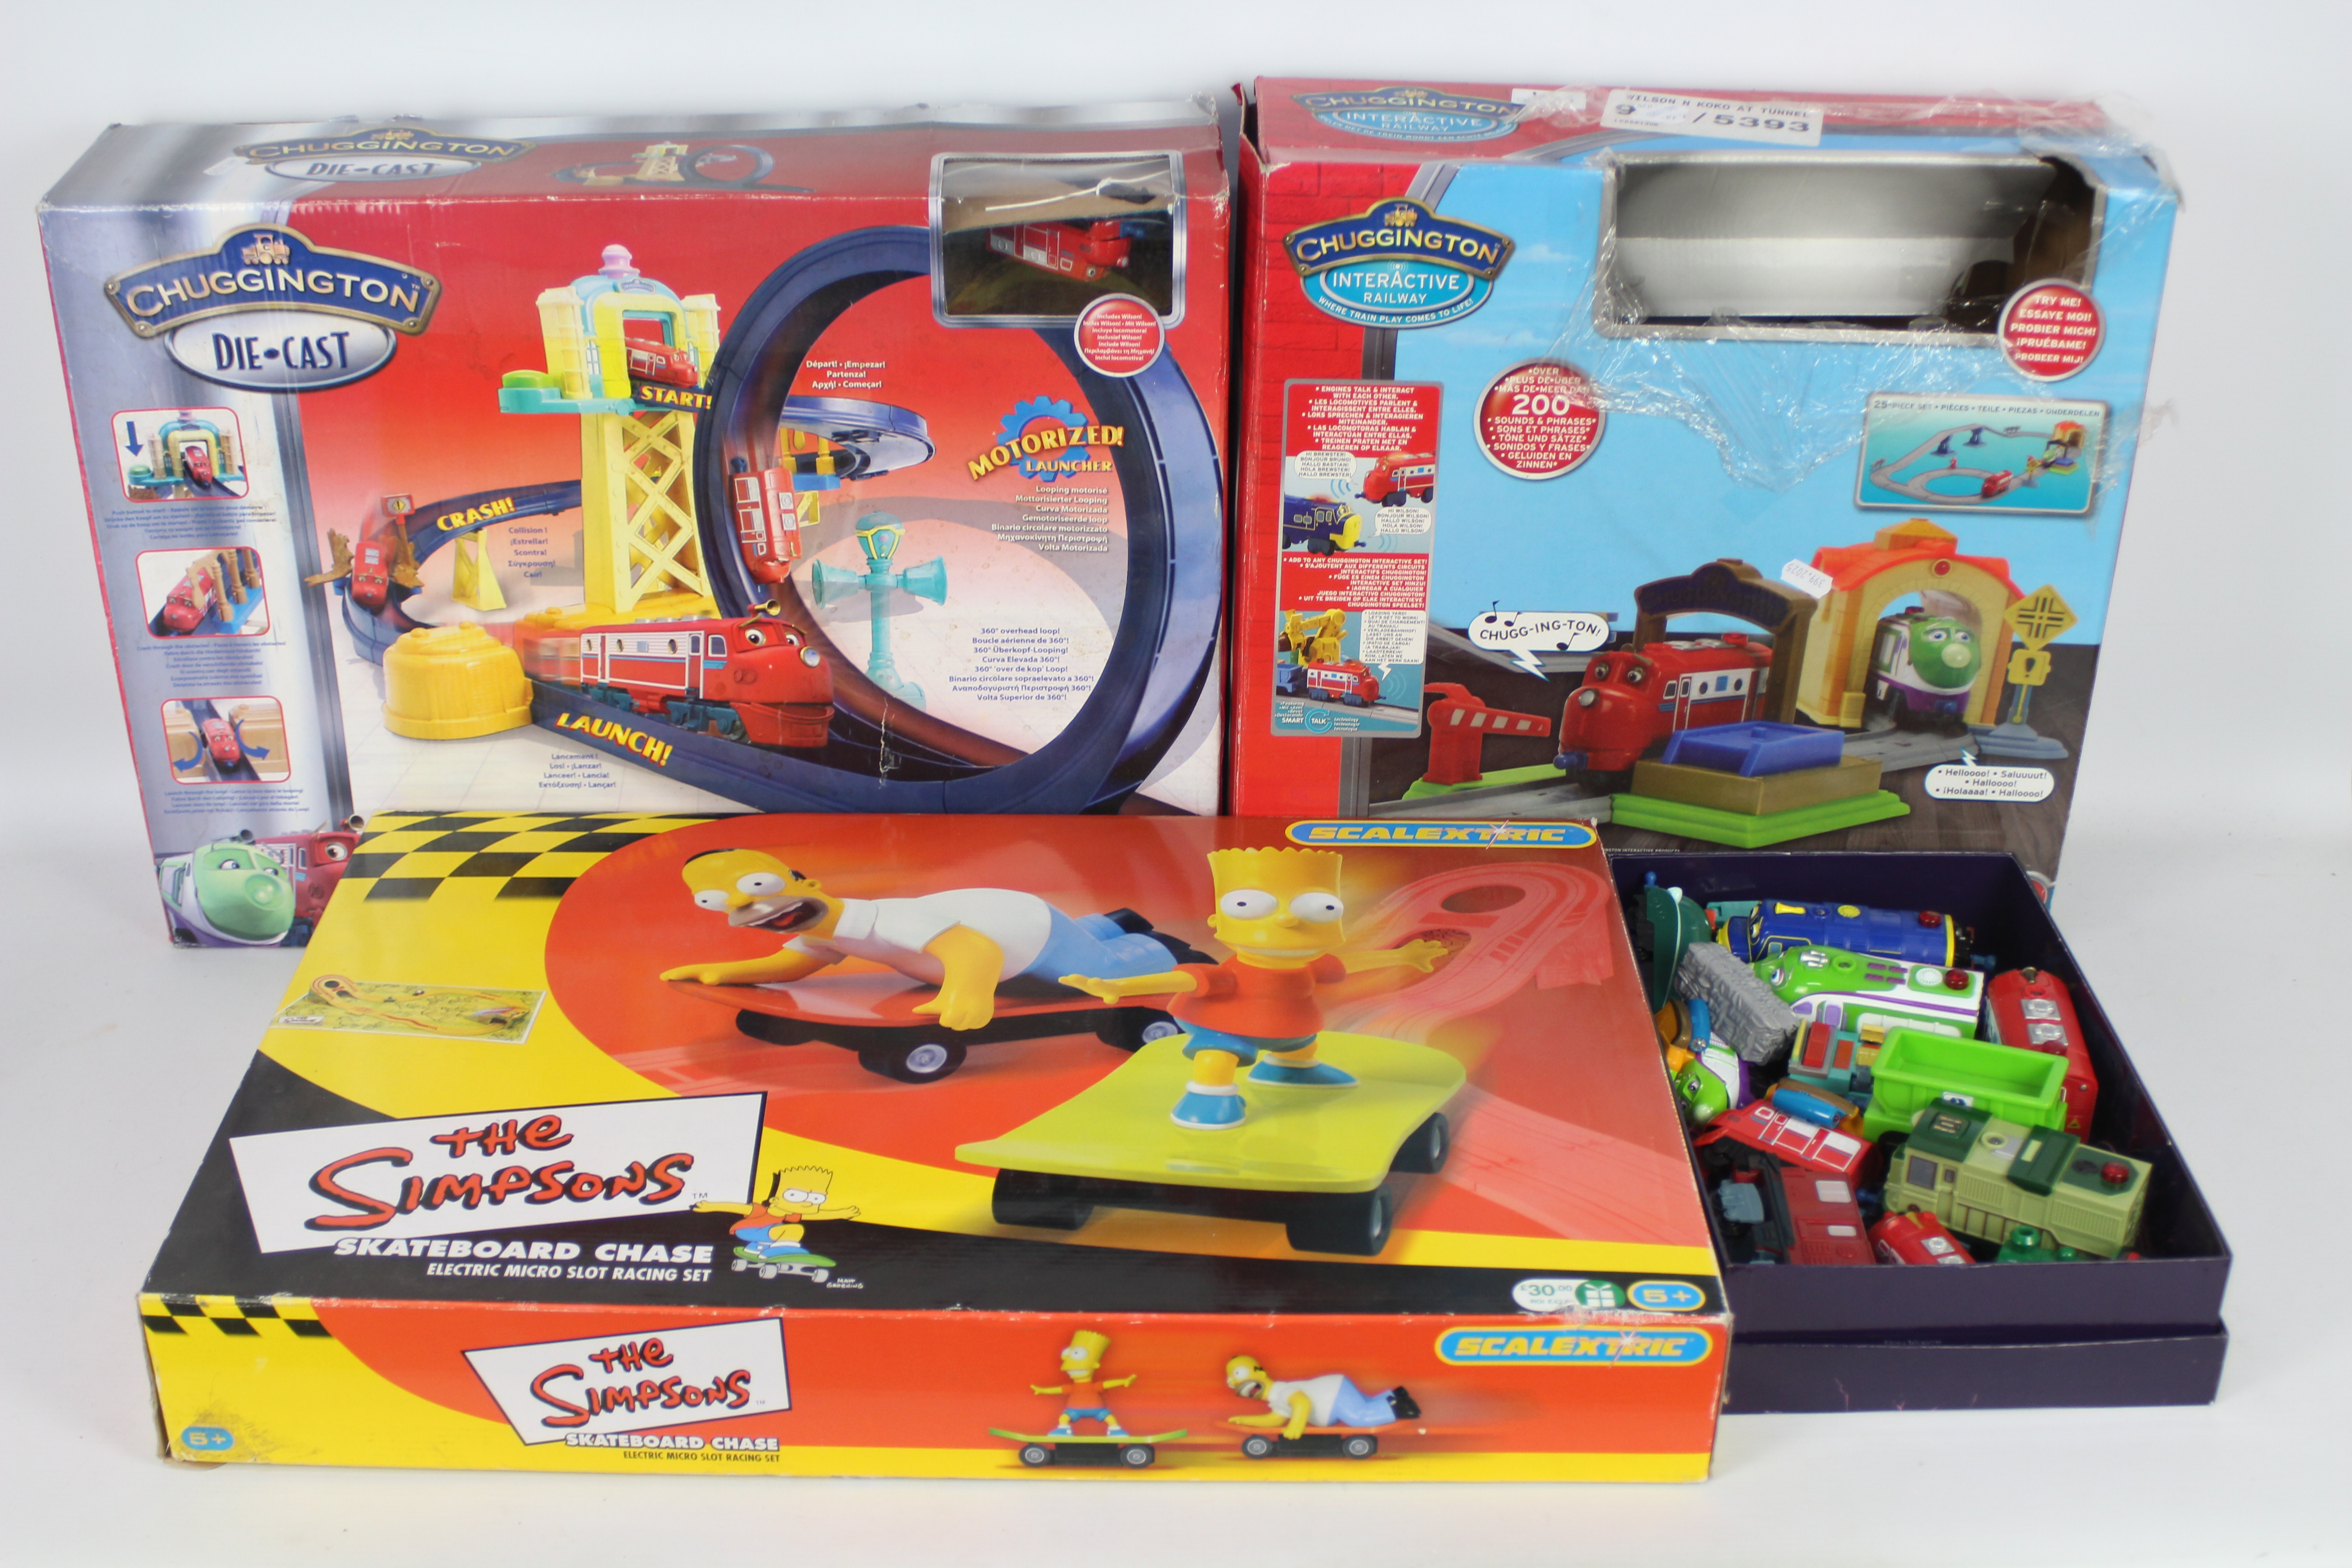 Chuggington - Scalextric - A boxed Chuggington play set along with 2 other boxes of loose